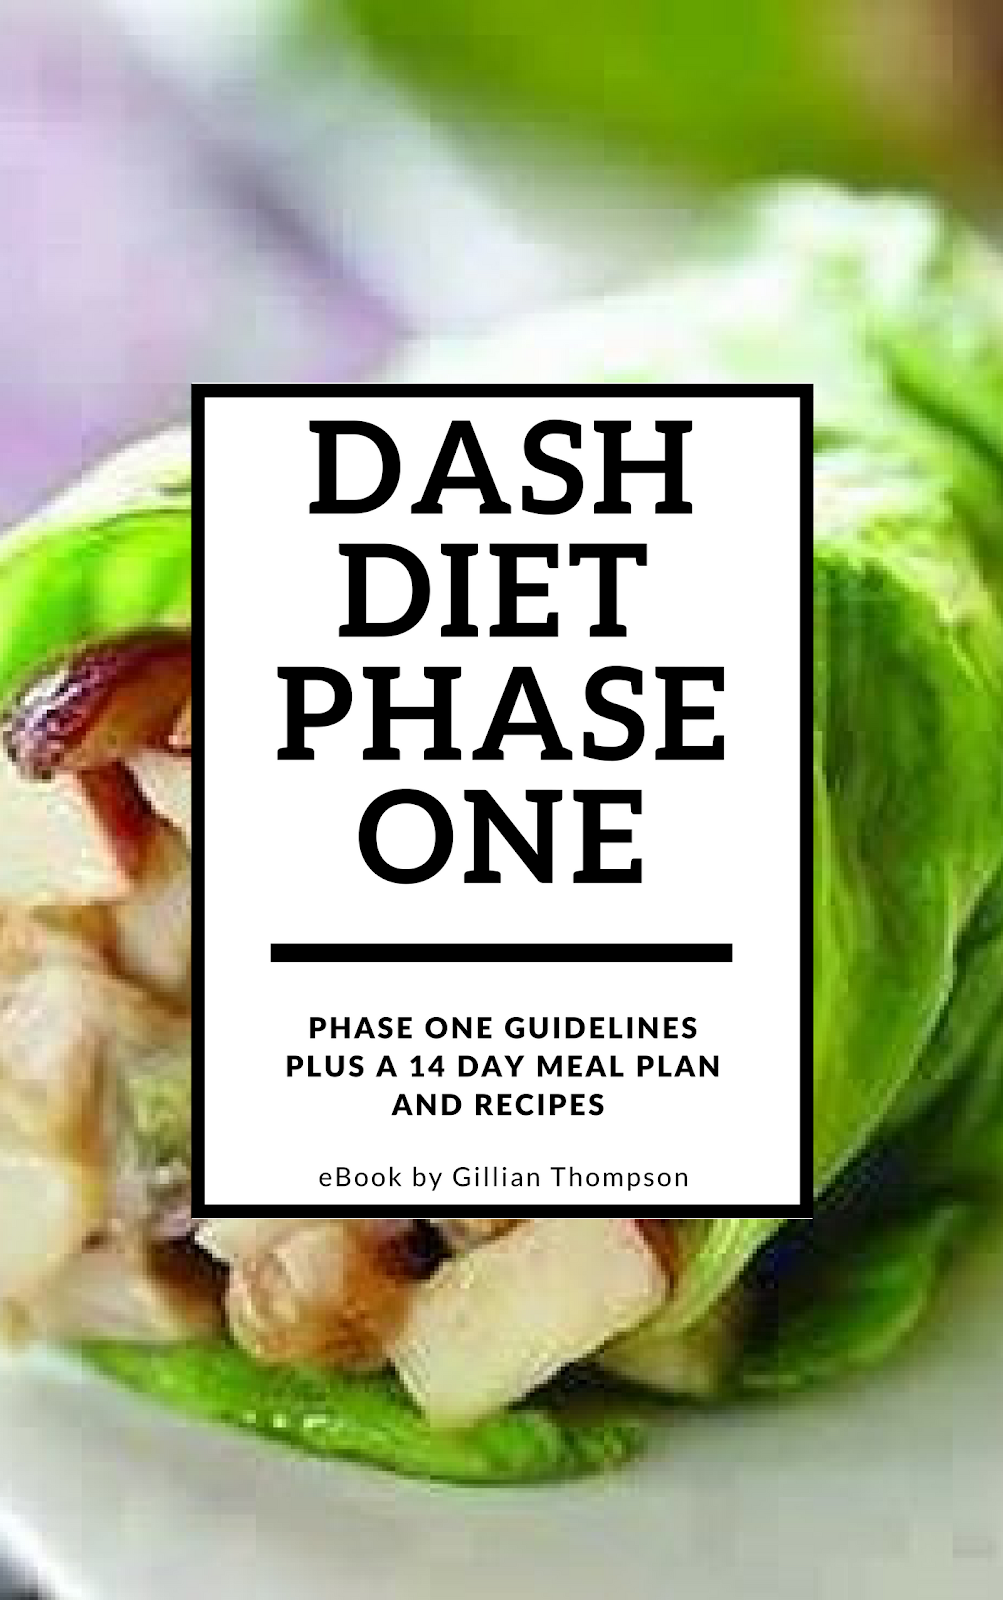 Phase 1 Recipes + 14 Day Meal Plan